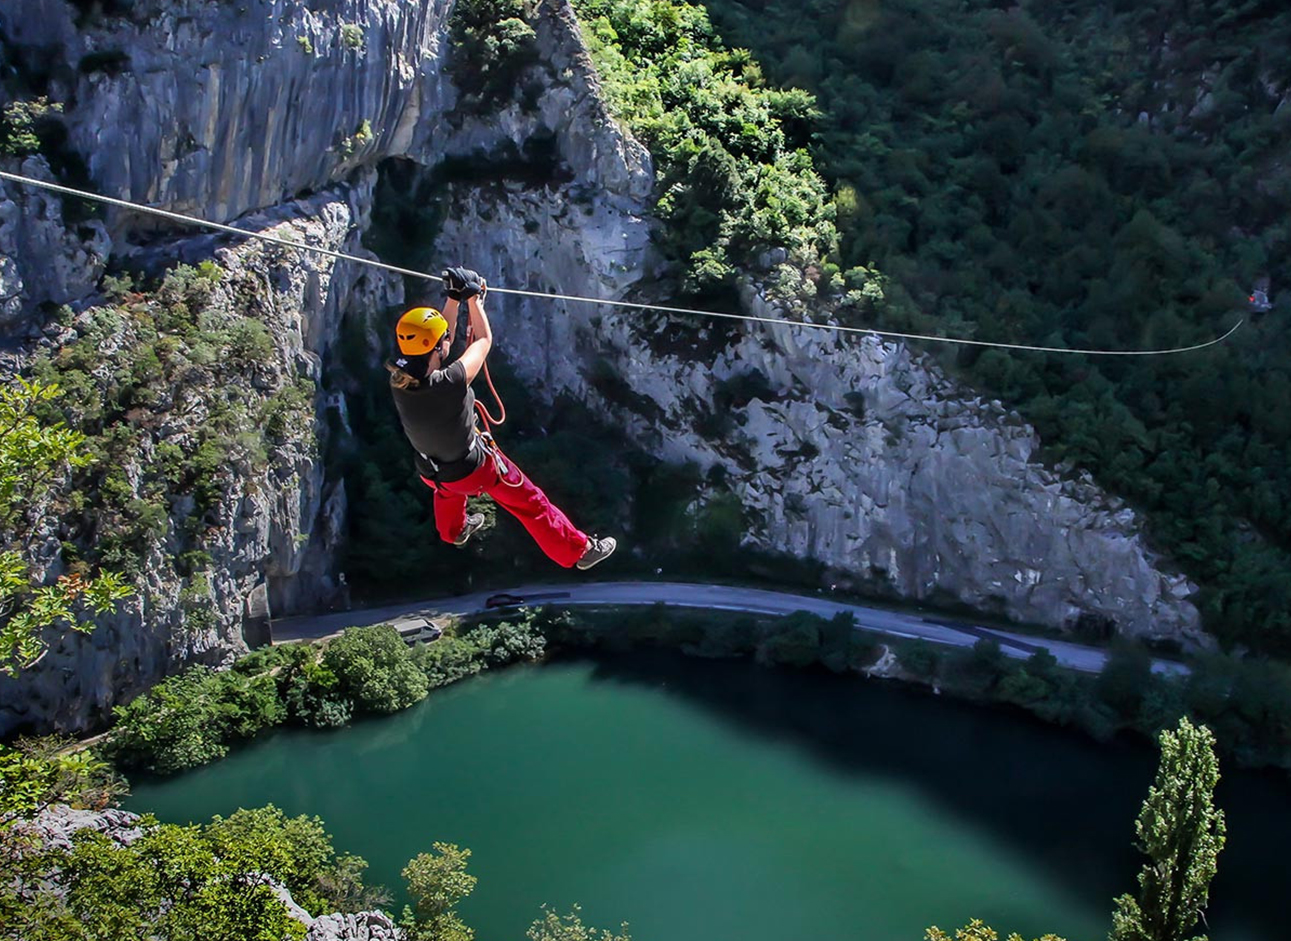 Zipline - Experience the thrill of soaring through the air